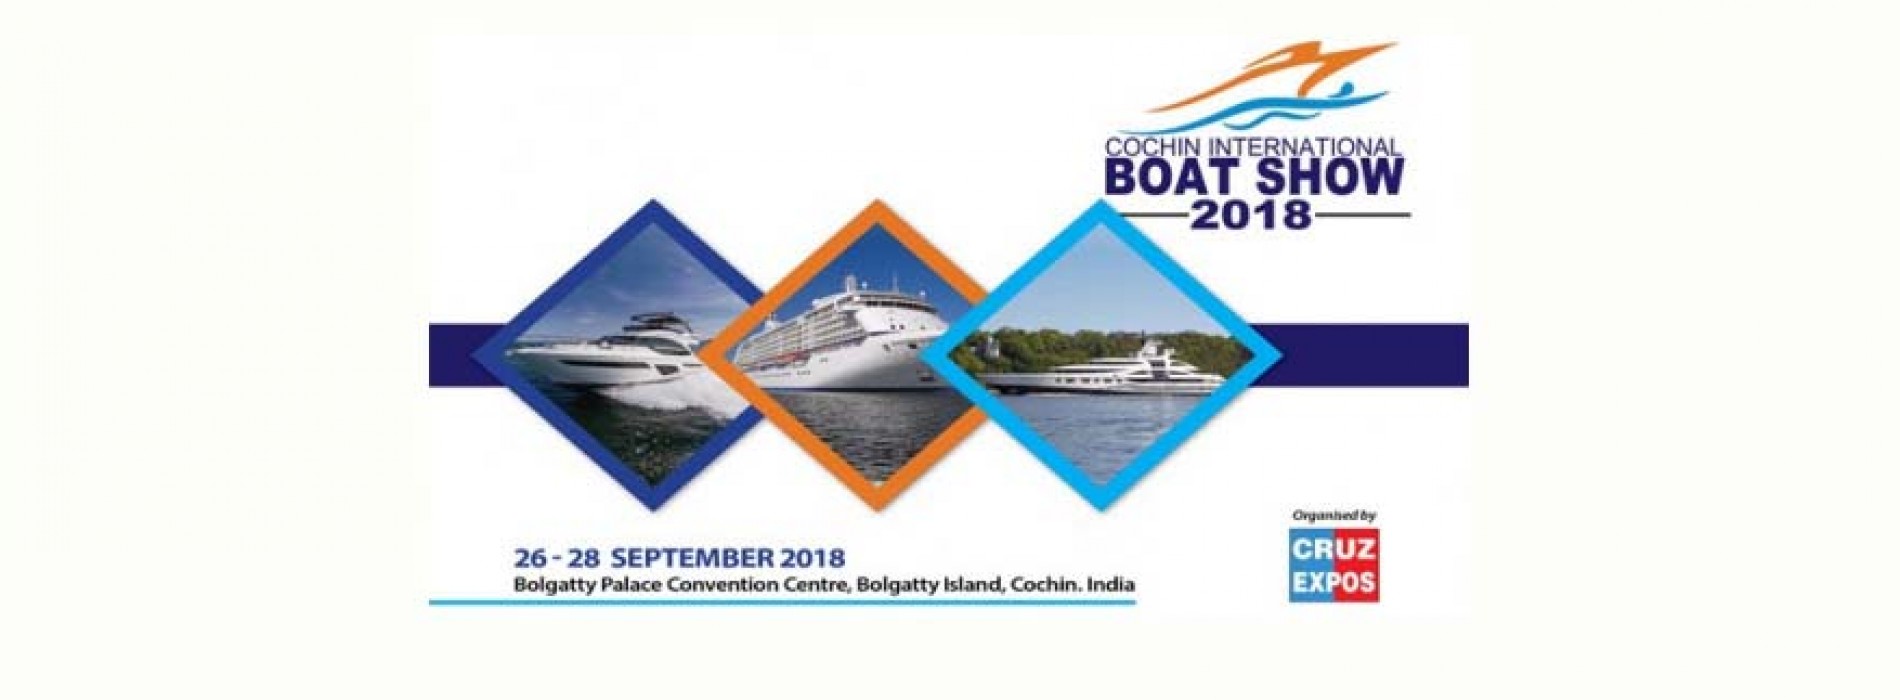 The First Cochin International Boat Show to be held from September 26